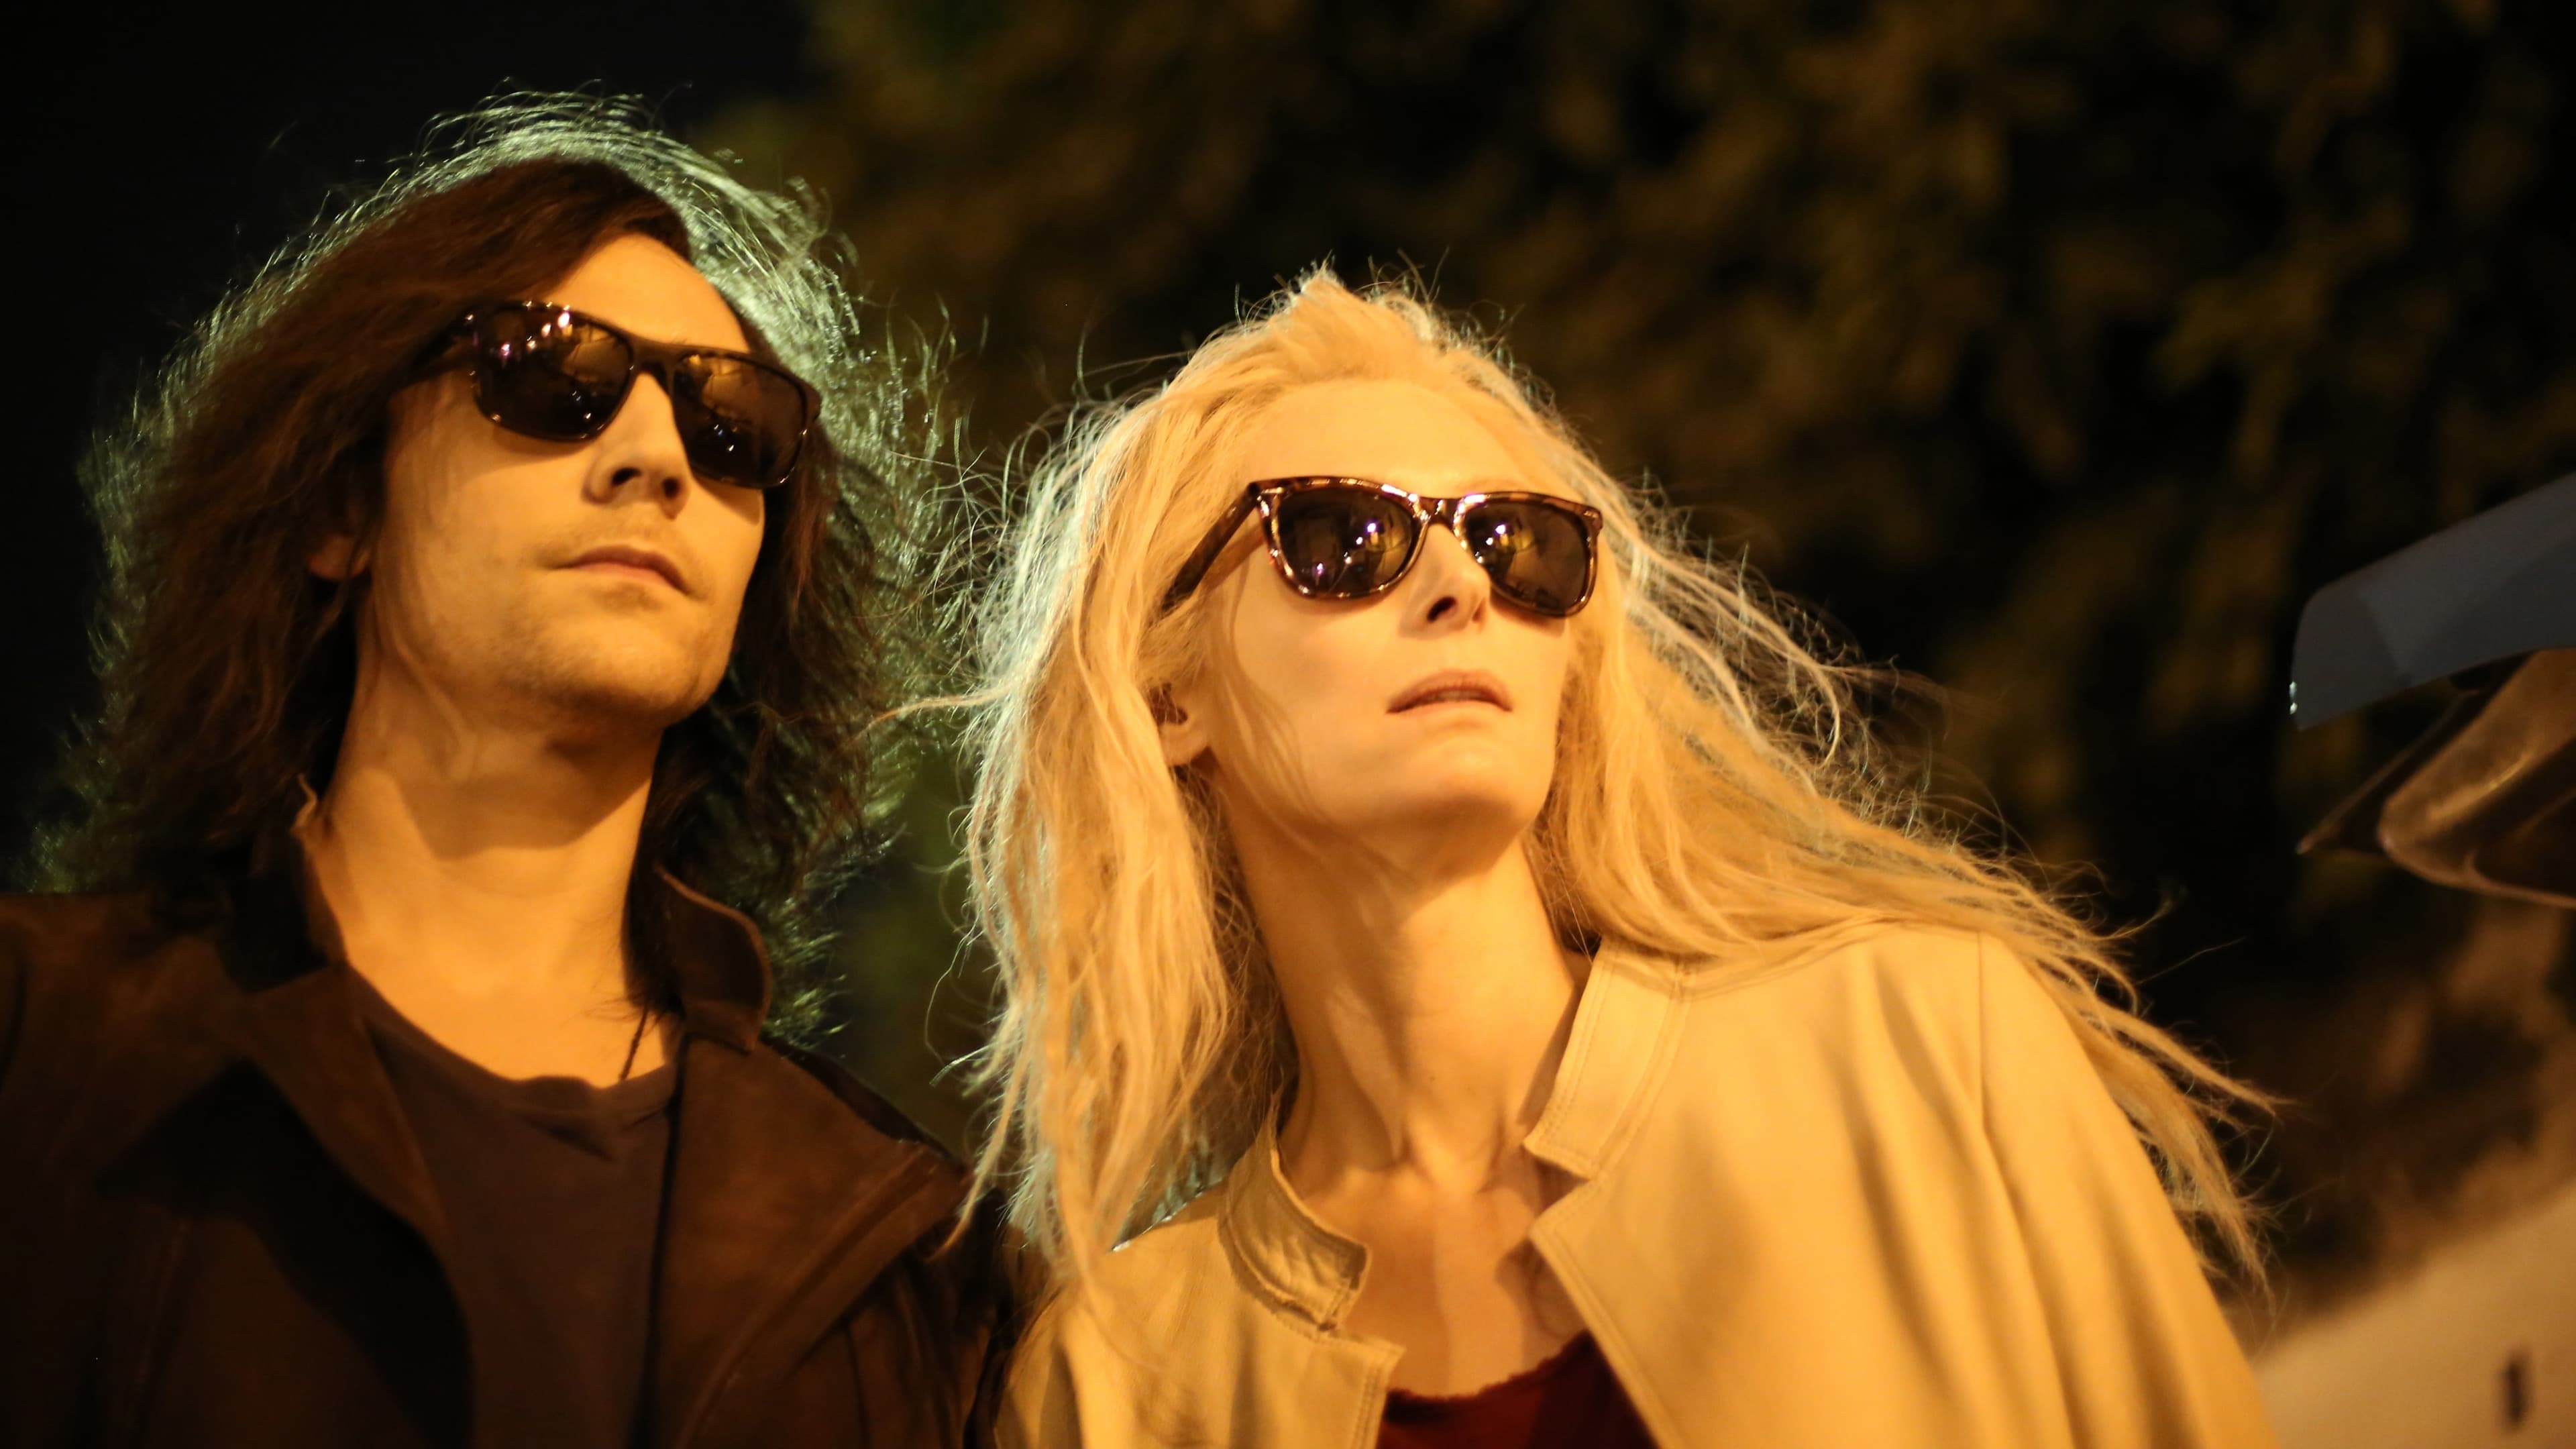 Only Lovers Left Alive movies, Backdrops movie database, Tmdb backdrops movie, Alive 2013 backdrops, 3840x2160 4K Desktop